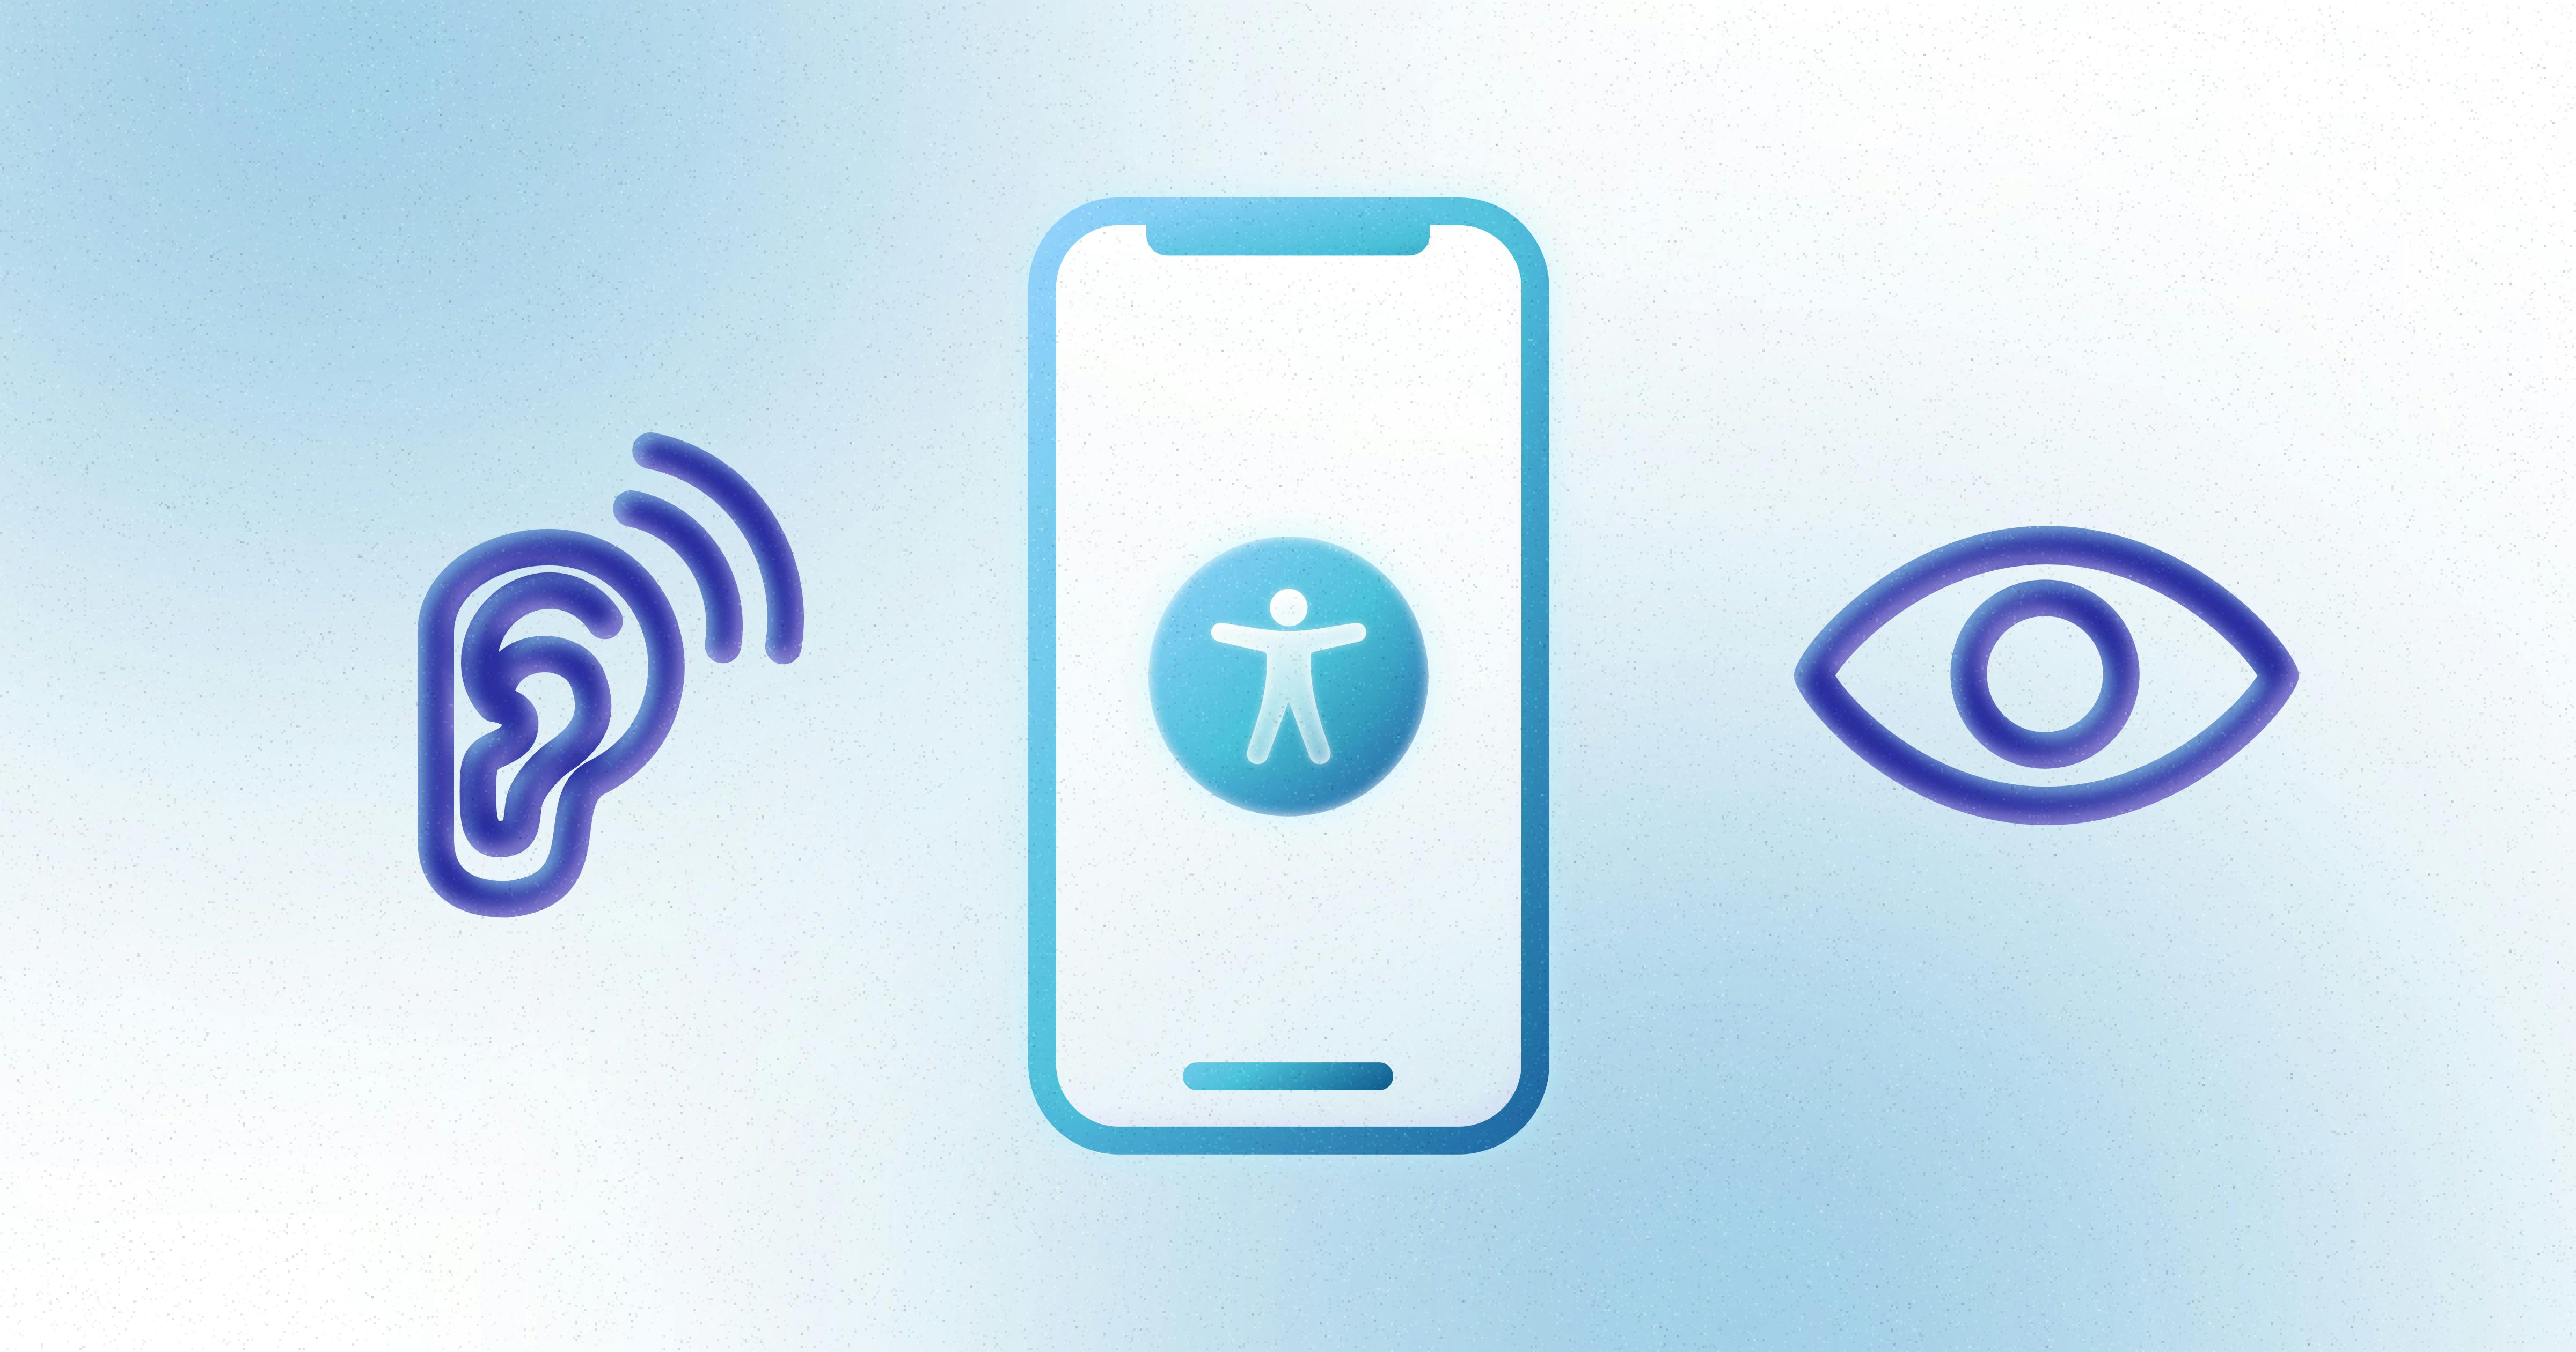 A mobile phone with an accessibility symbol on the screen, bordered by icons of an ear and an eye.